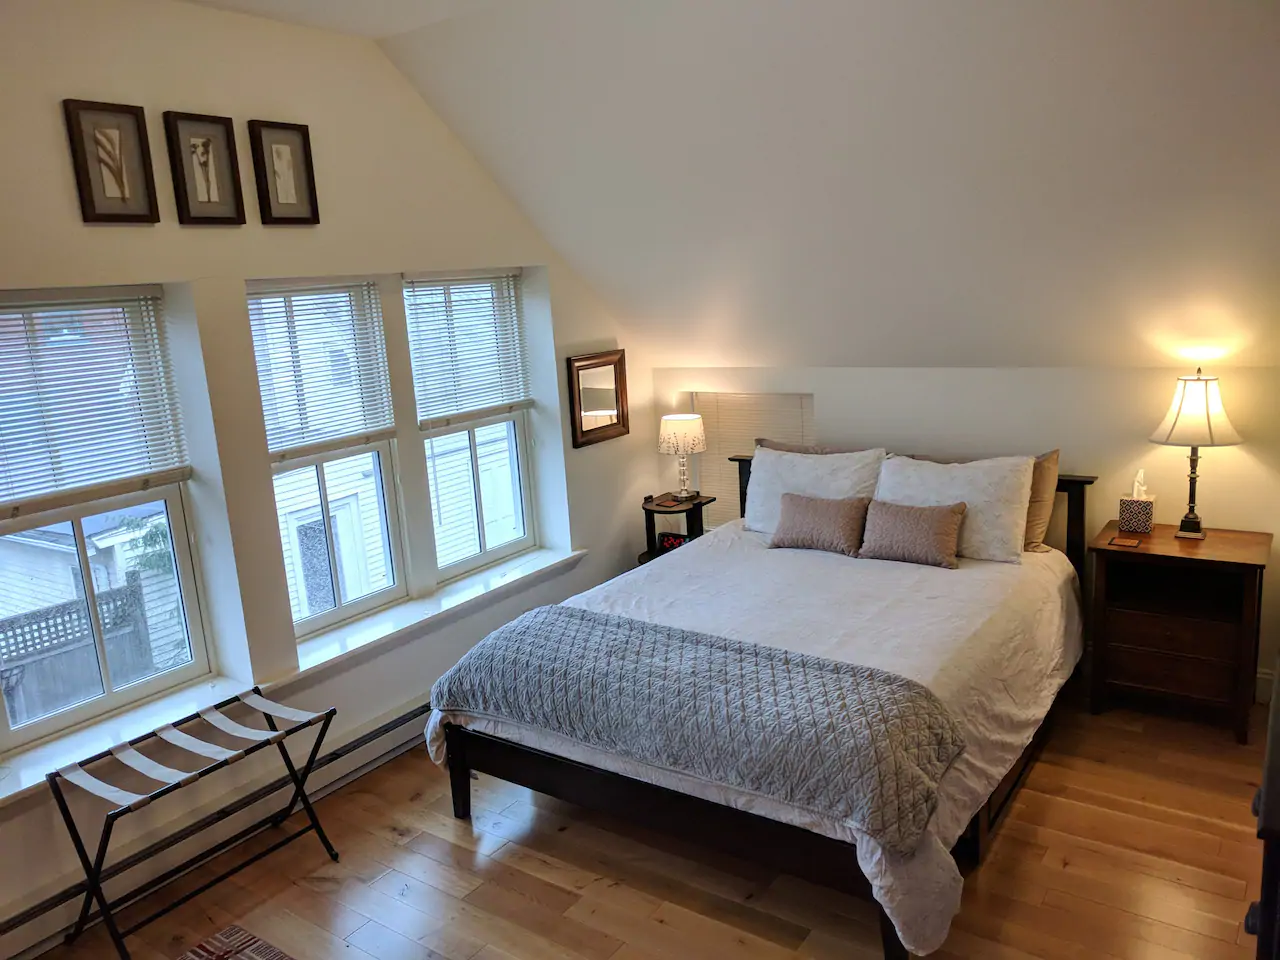 White bed perfectly made next to a set of windows in an arch-roofed room.